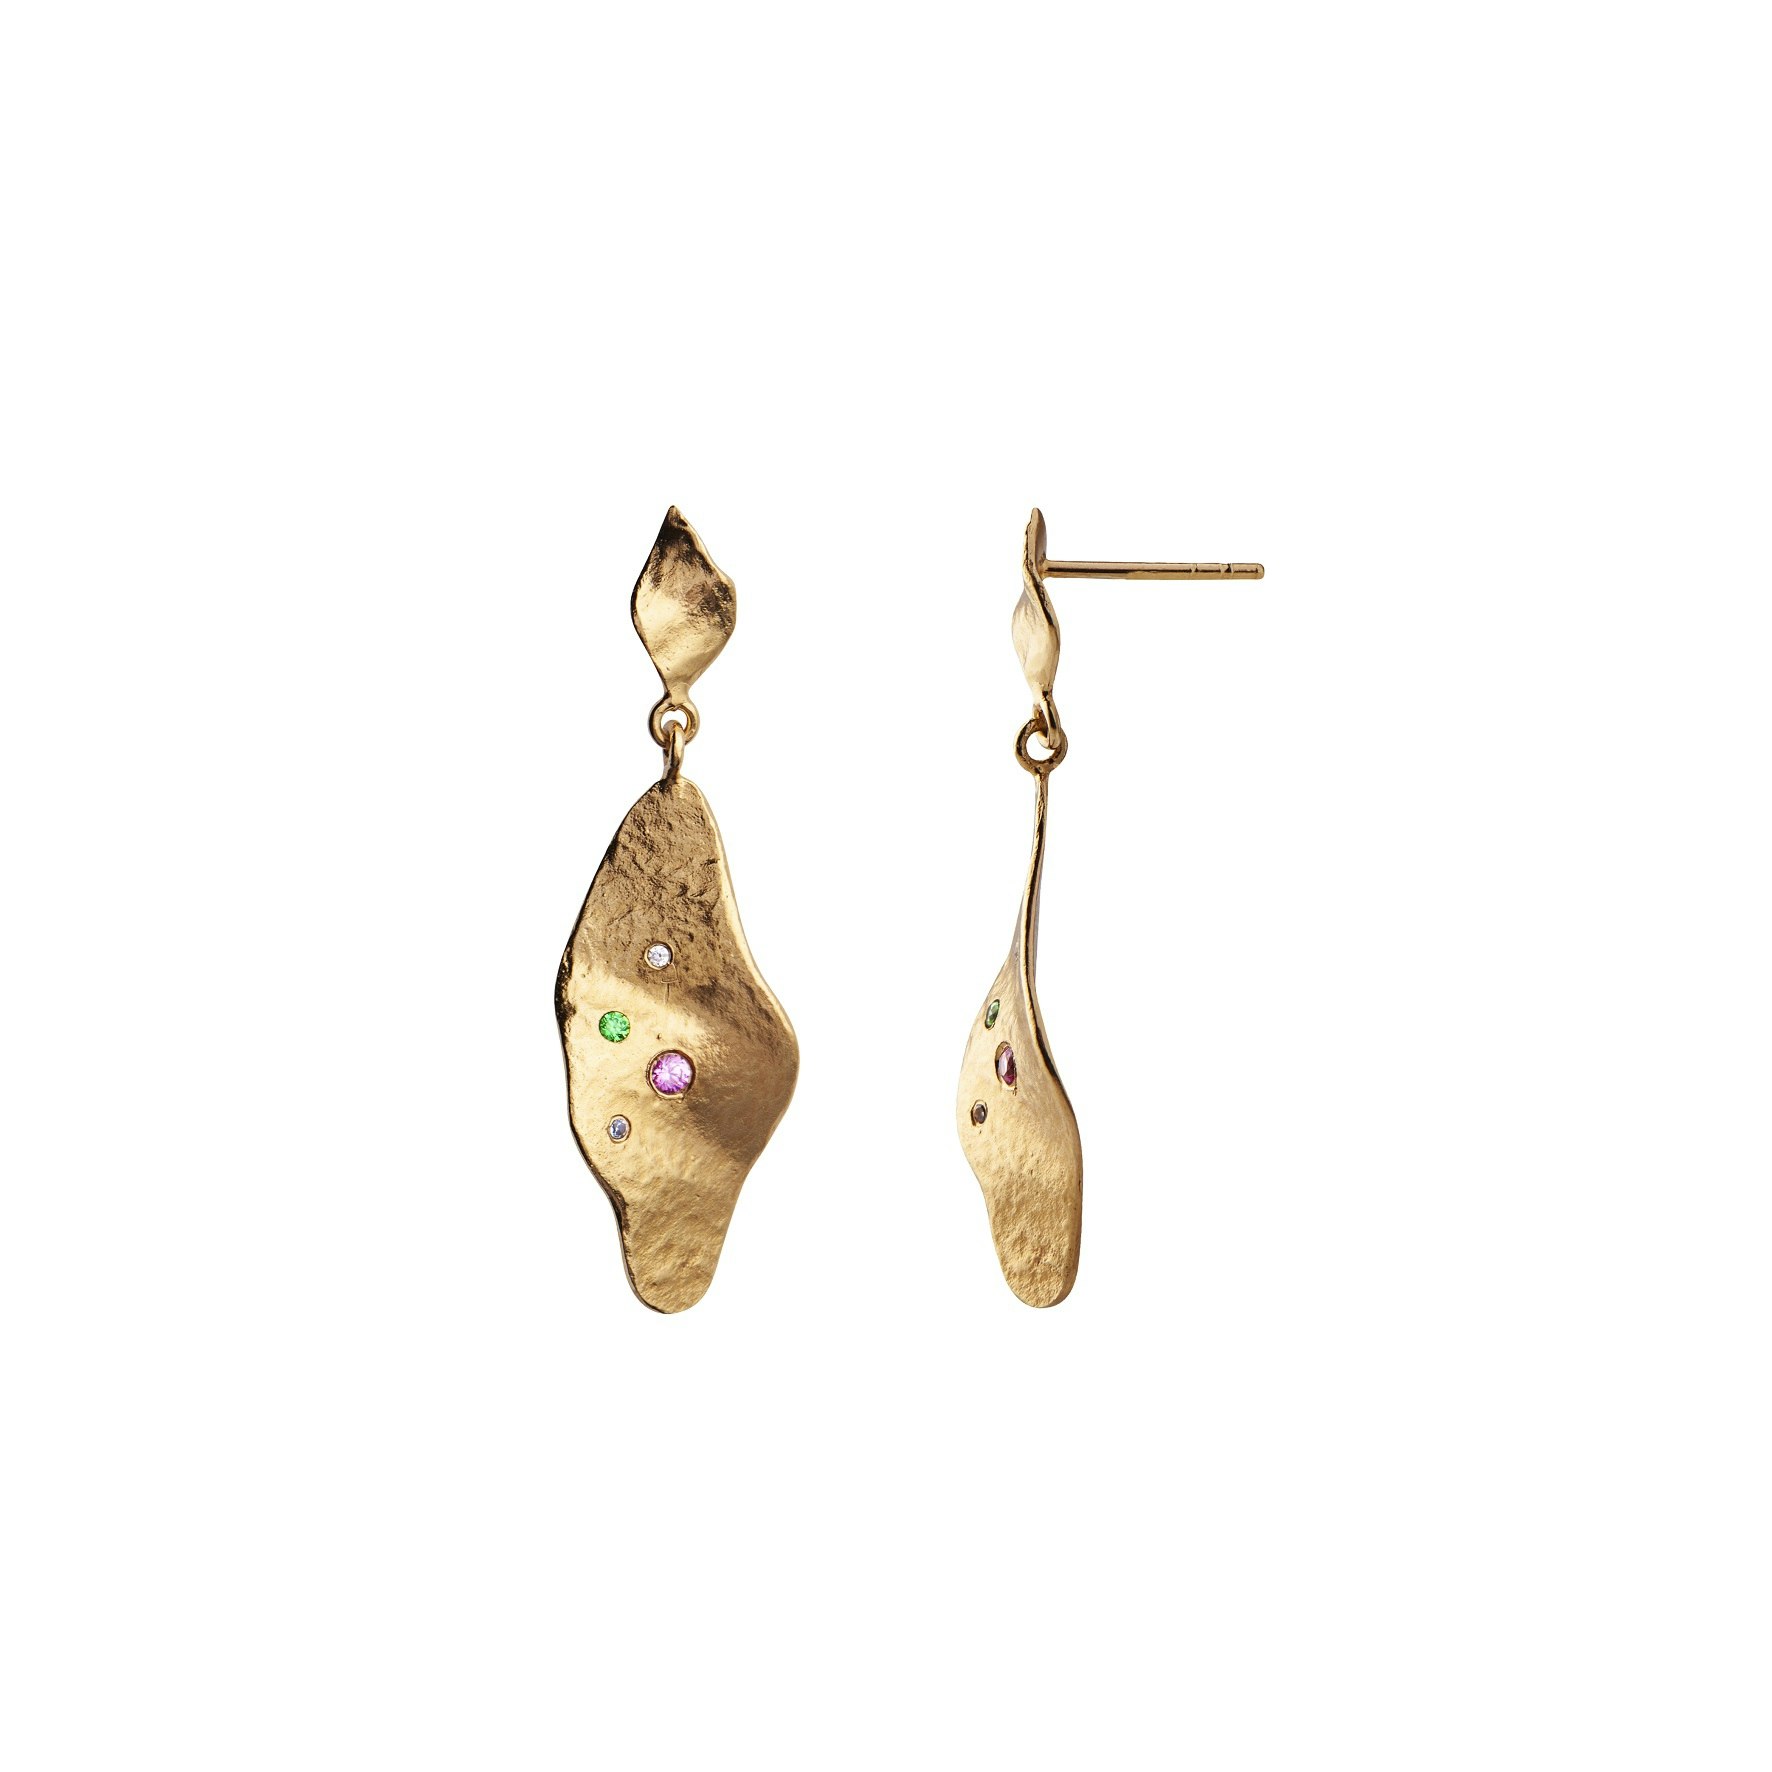 Dangling Ile De L'Amour Earring With Stones fra STINE A Jewelry i Forgyldt-Sølv Sterling 925